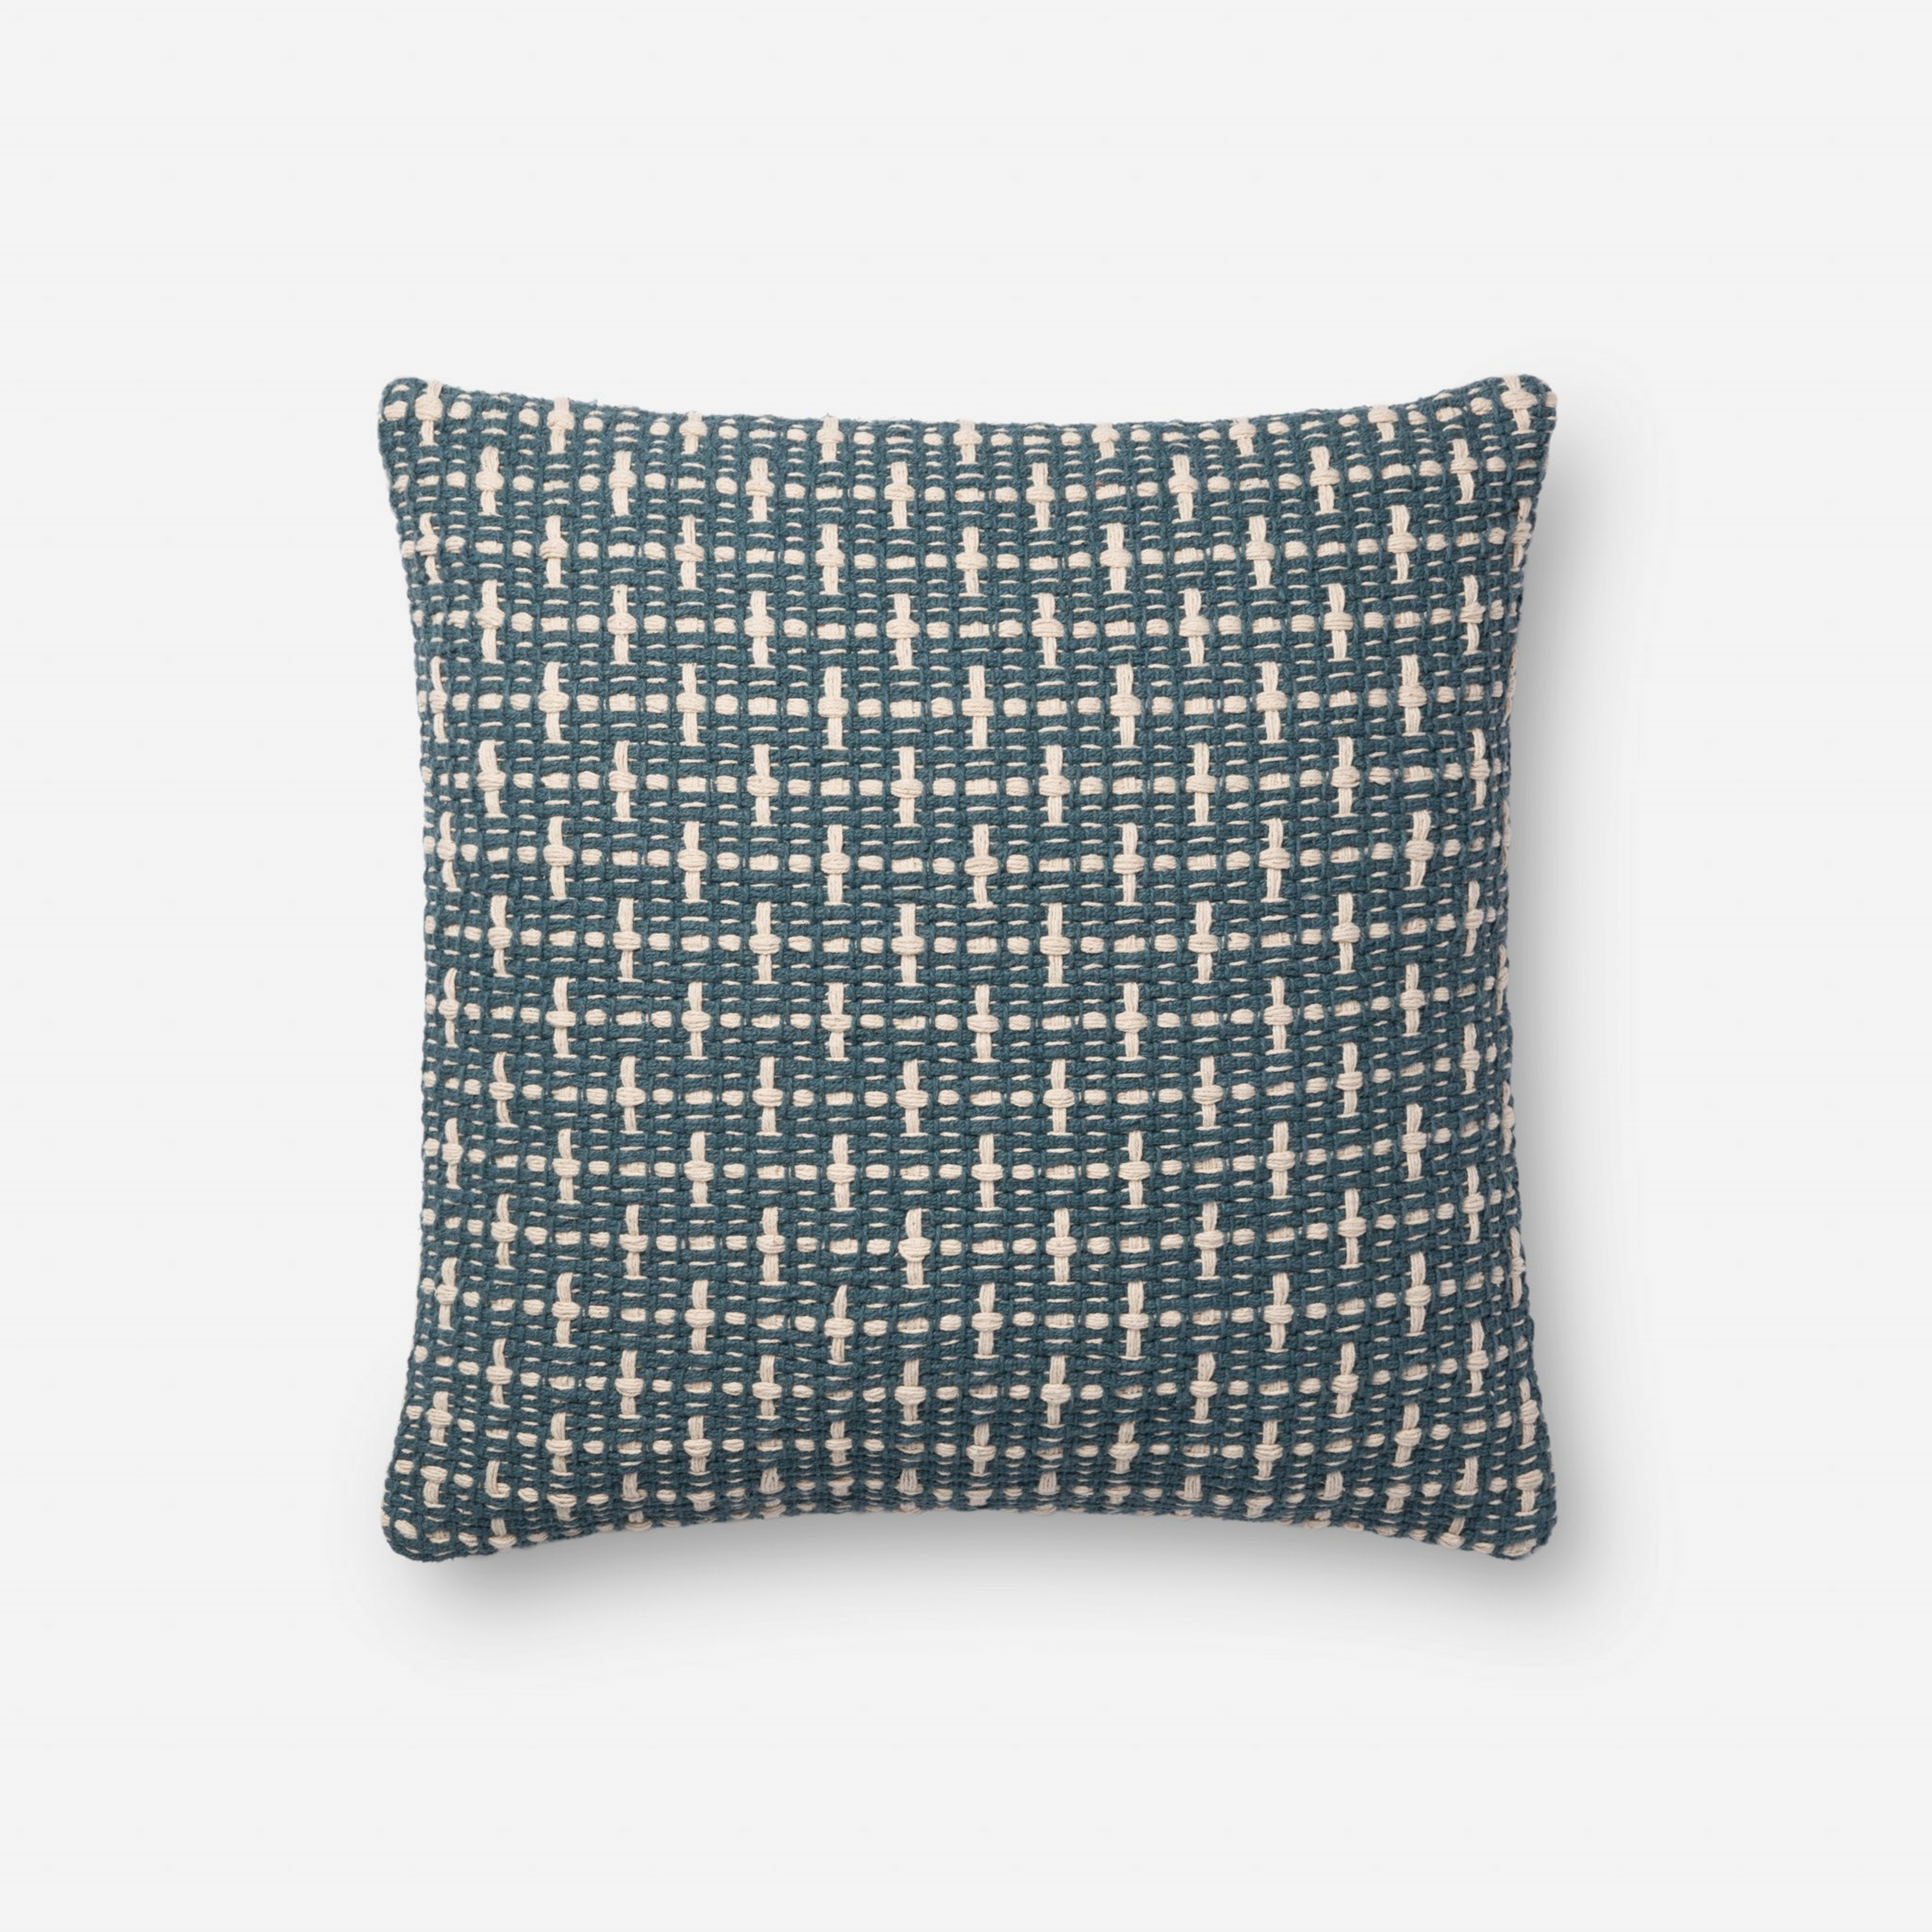 Magnolia Woven Throw Pillow, Blue, 18" x 18" - Magnolia Home by Joana Gaines Crafted by Loloi Rugs